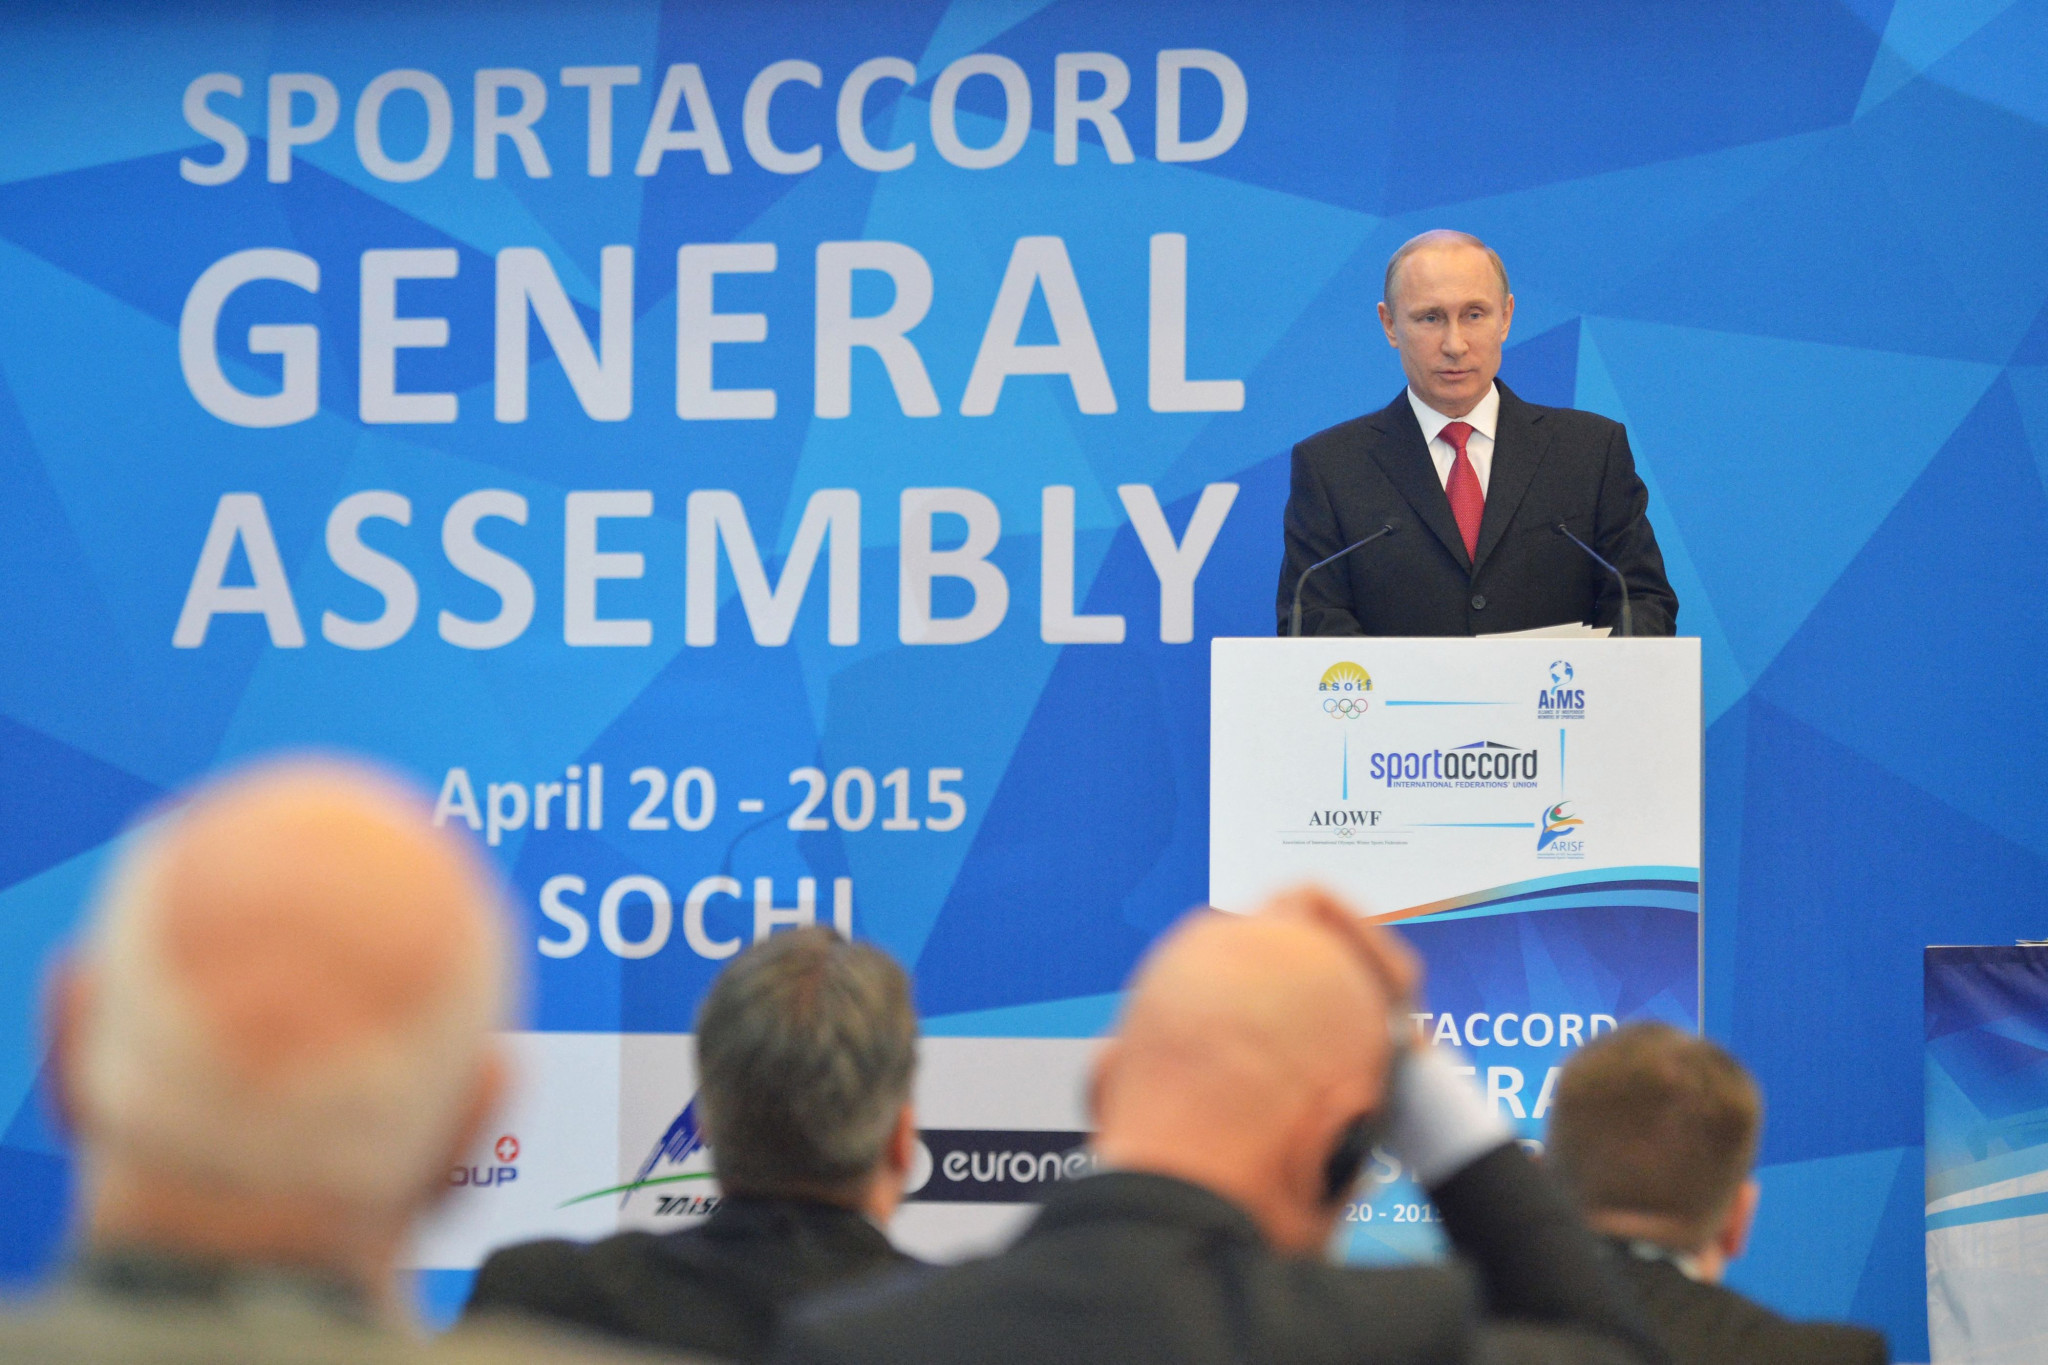 The 2015 SportAccord General Assembly proved to be a defining moment in a decades-long power struggle ©Getty Images